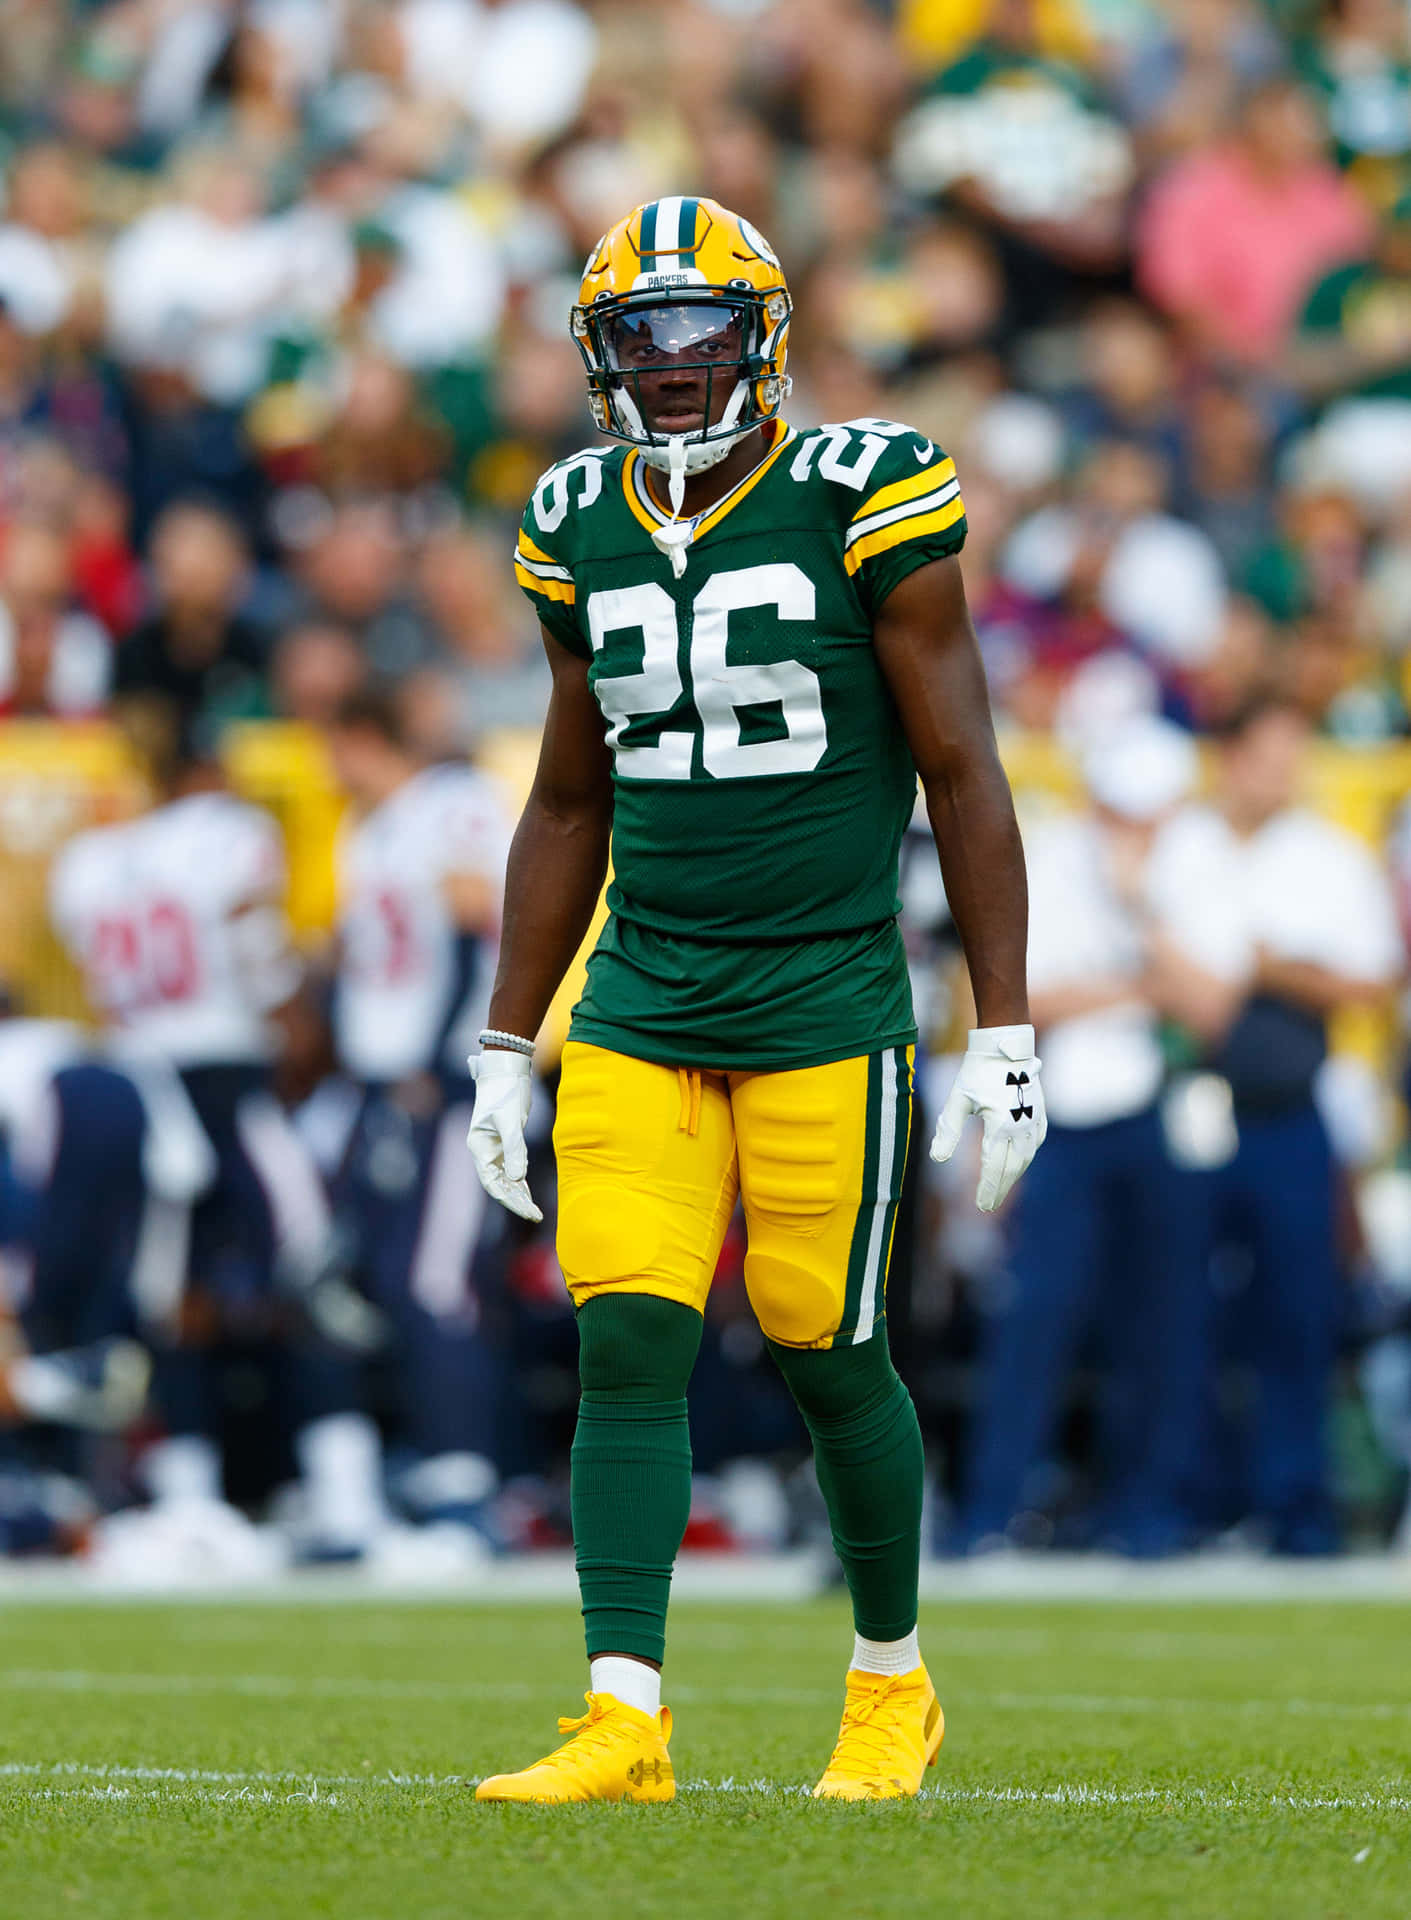 Green Bay Packers Player26 On Field Wallpaper